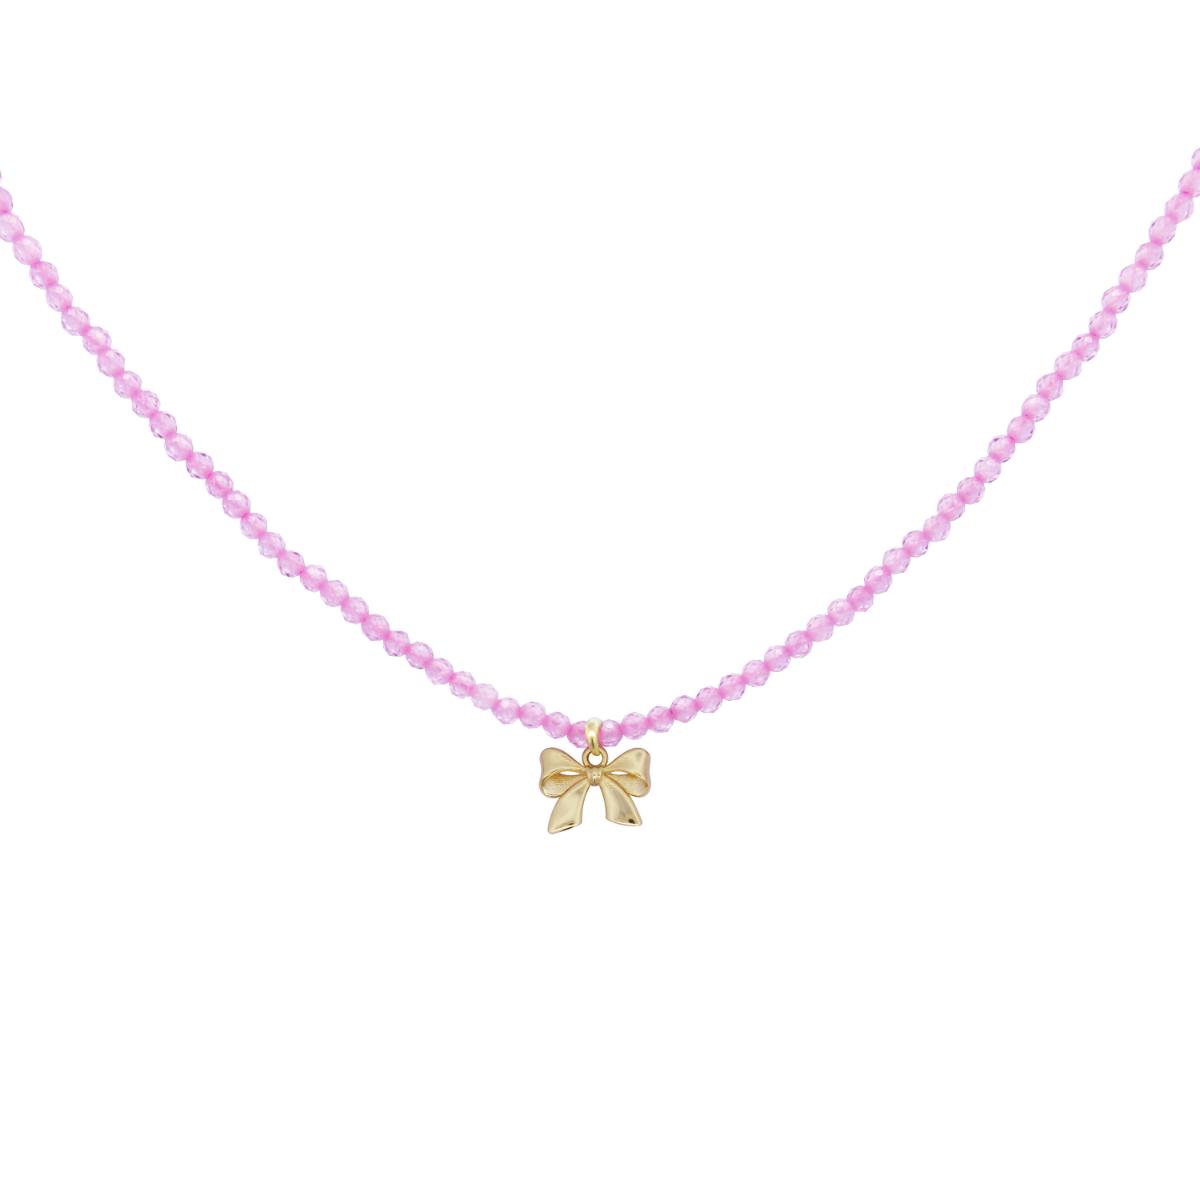 Necklace with simple bow and thread of zirconia - CANDY BOW